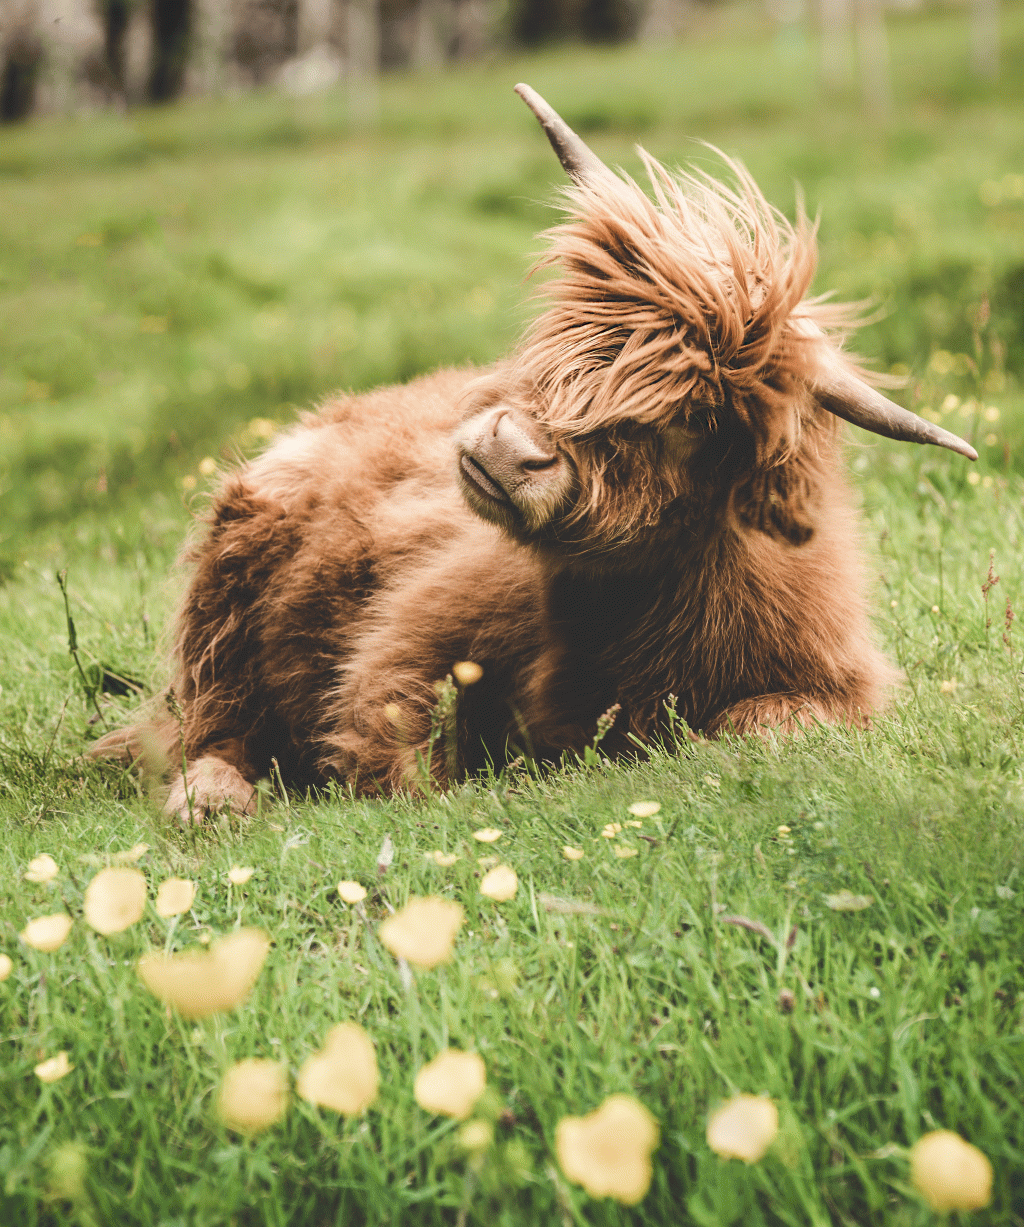 Hey everyone, @el.picko here again. If you’re lucky you may come across a highland cow in the Faroe Islands. They are unmistakably photogenic and generally very friendly. This young highland was definitely not shy and knew exactly what to do in front of the camera.